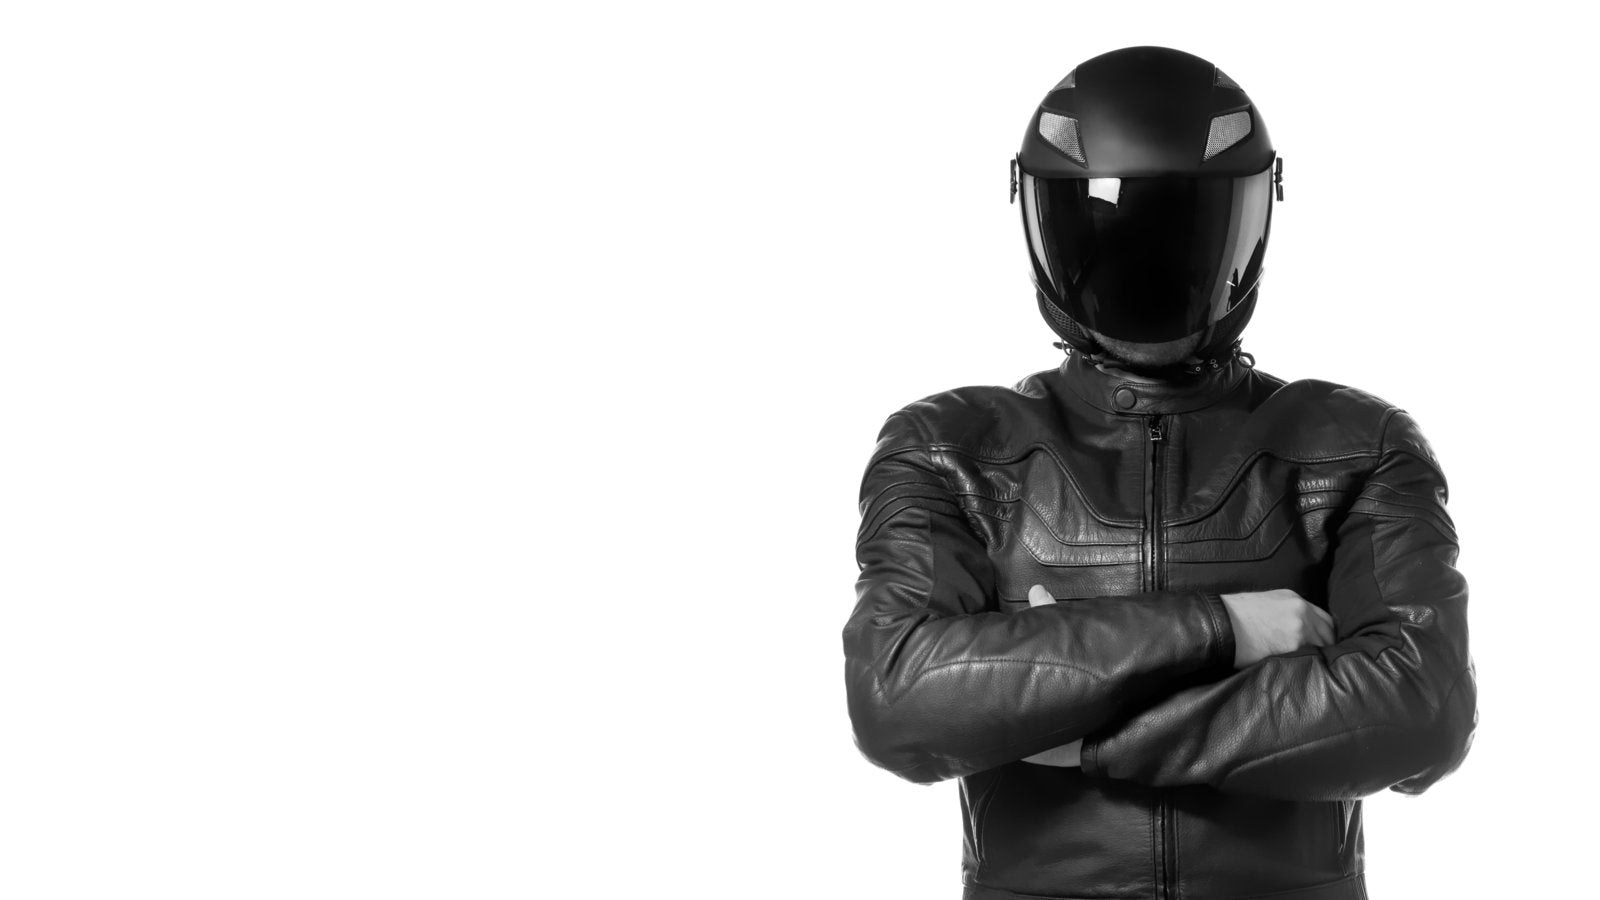 Motorcycle Safety Course 101 - 3 Things You Should Never Ride Without